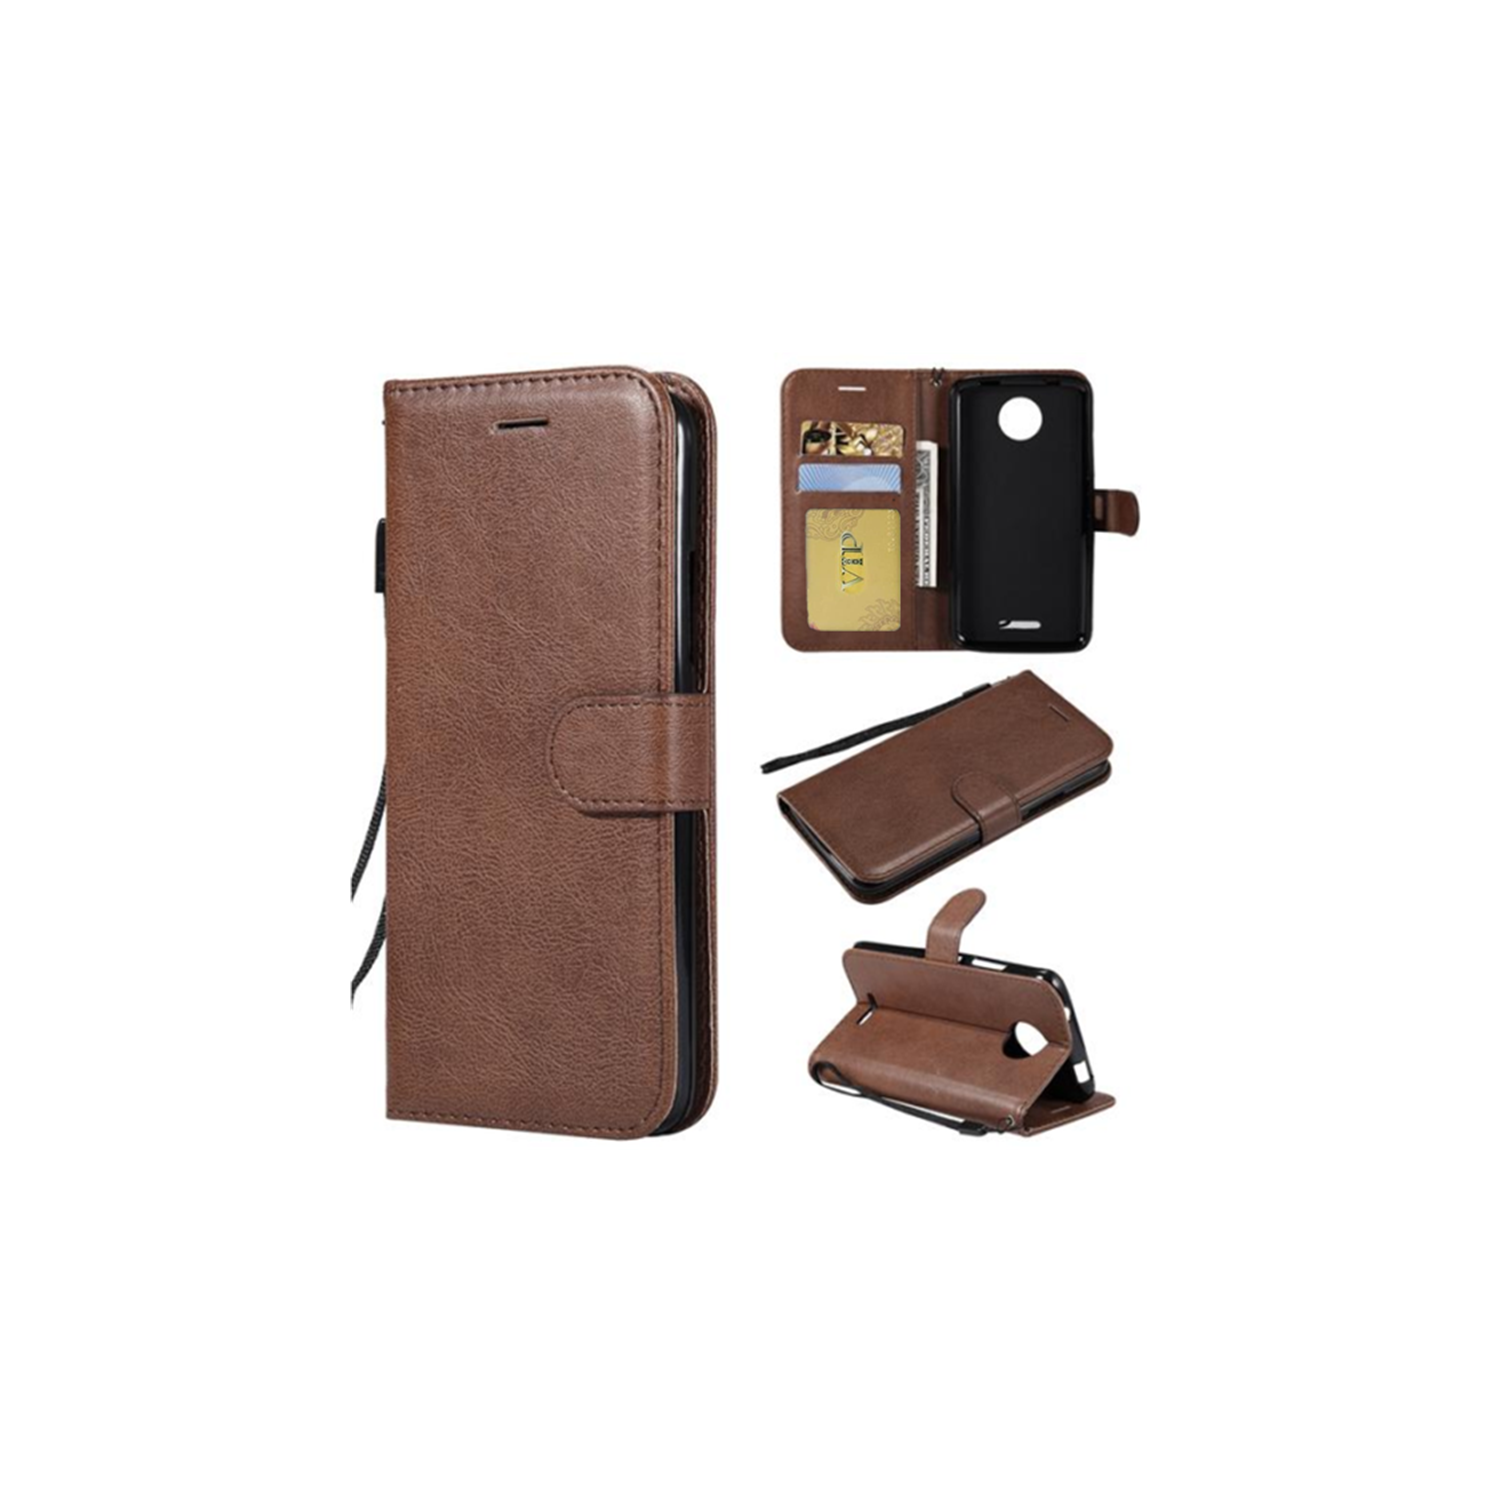 [CS] Motorola Moto Z3 Play Case, Magnetic Leather Folio Wallet Flip Case Cover with Card Slot, Brown